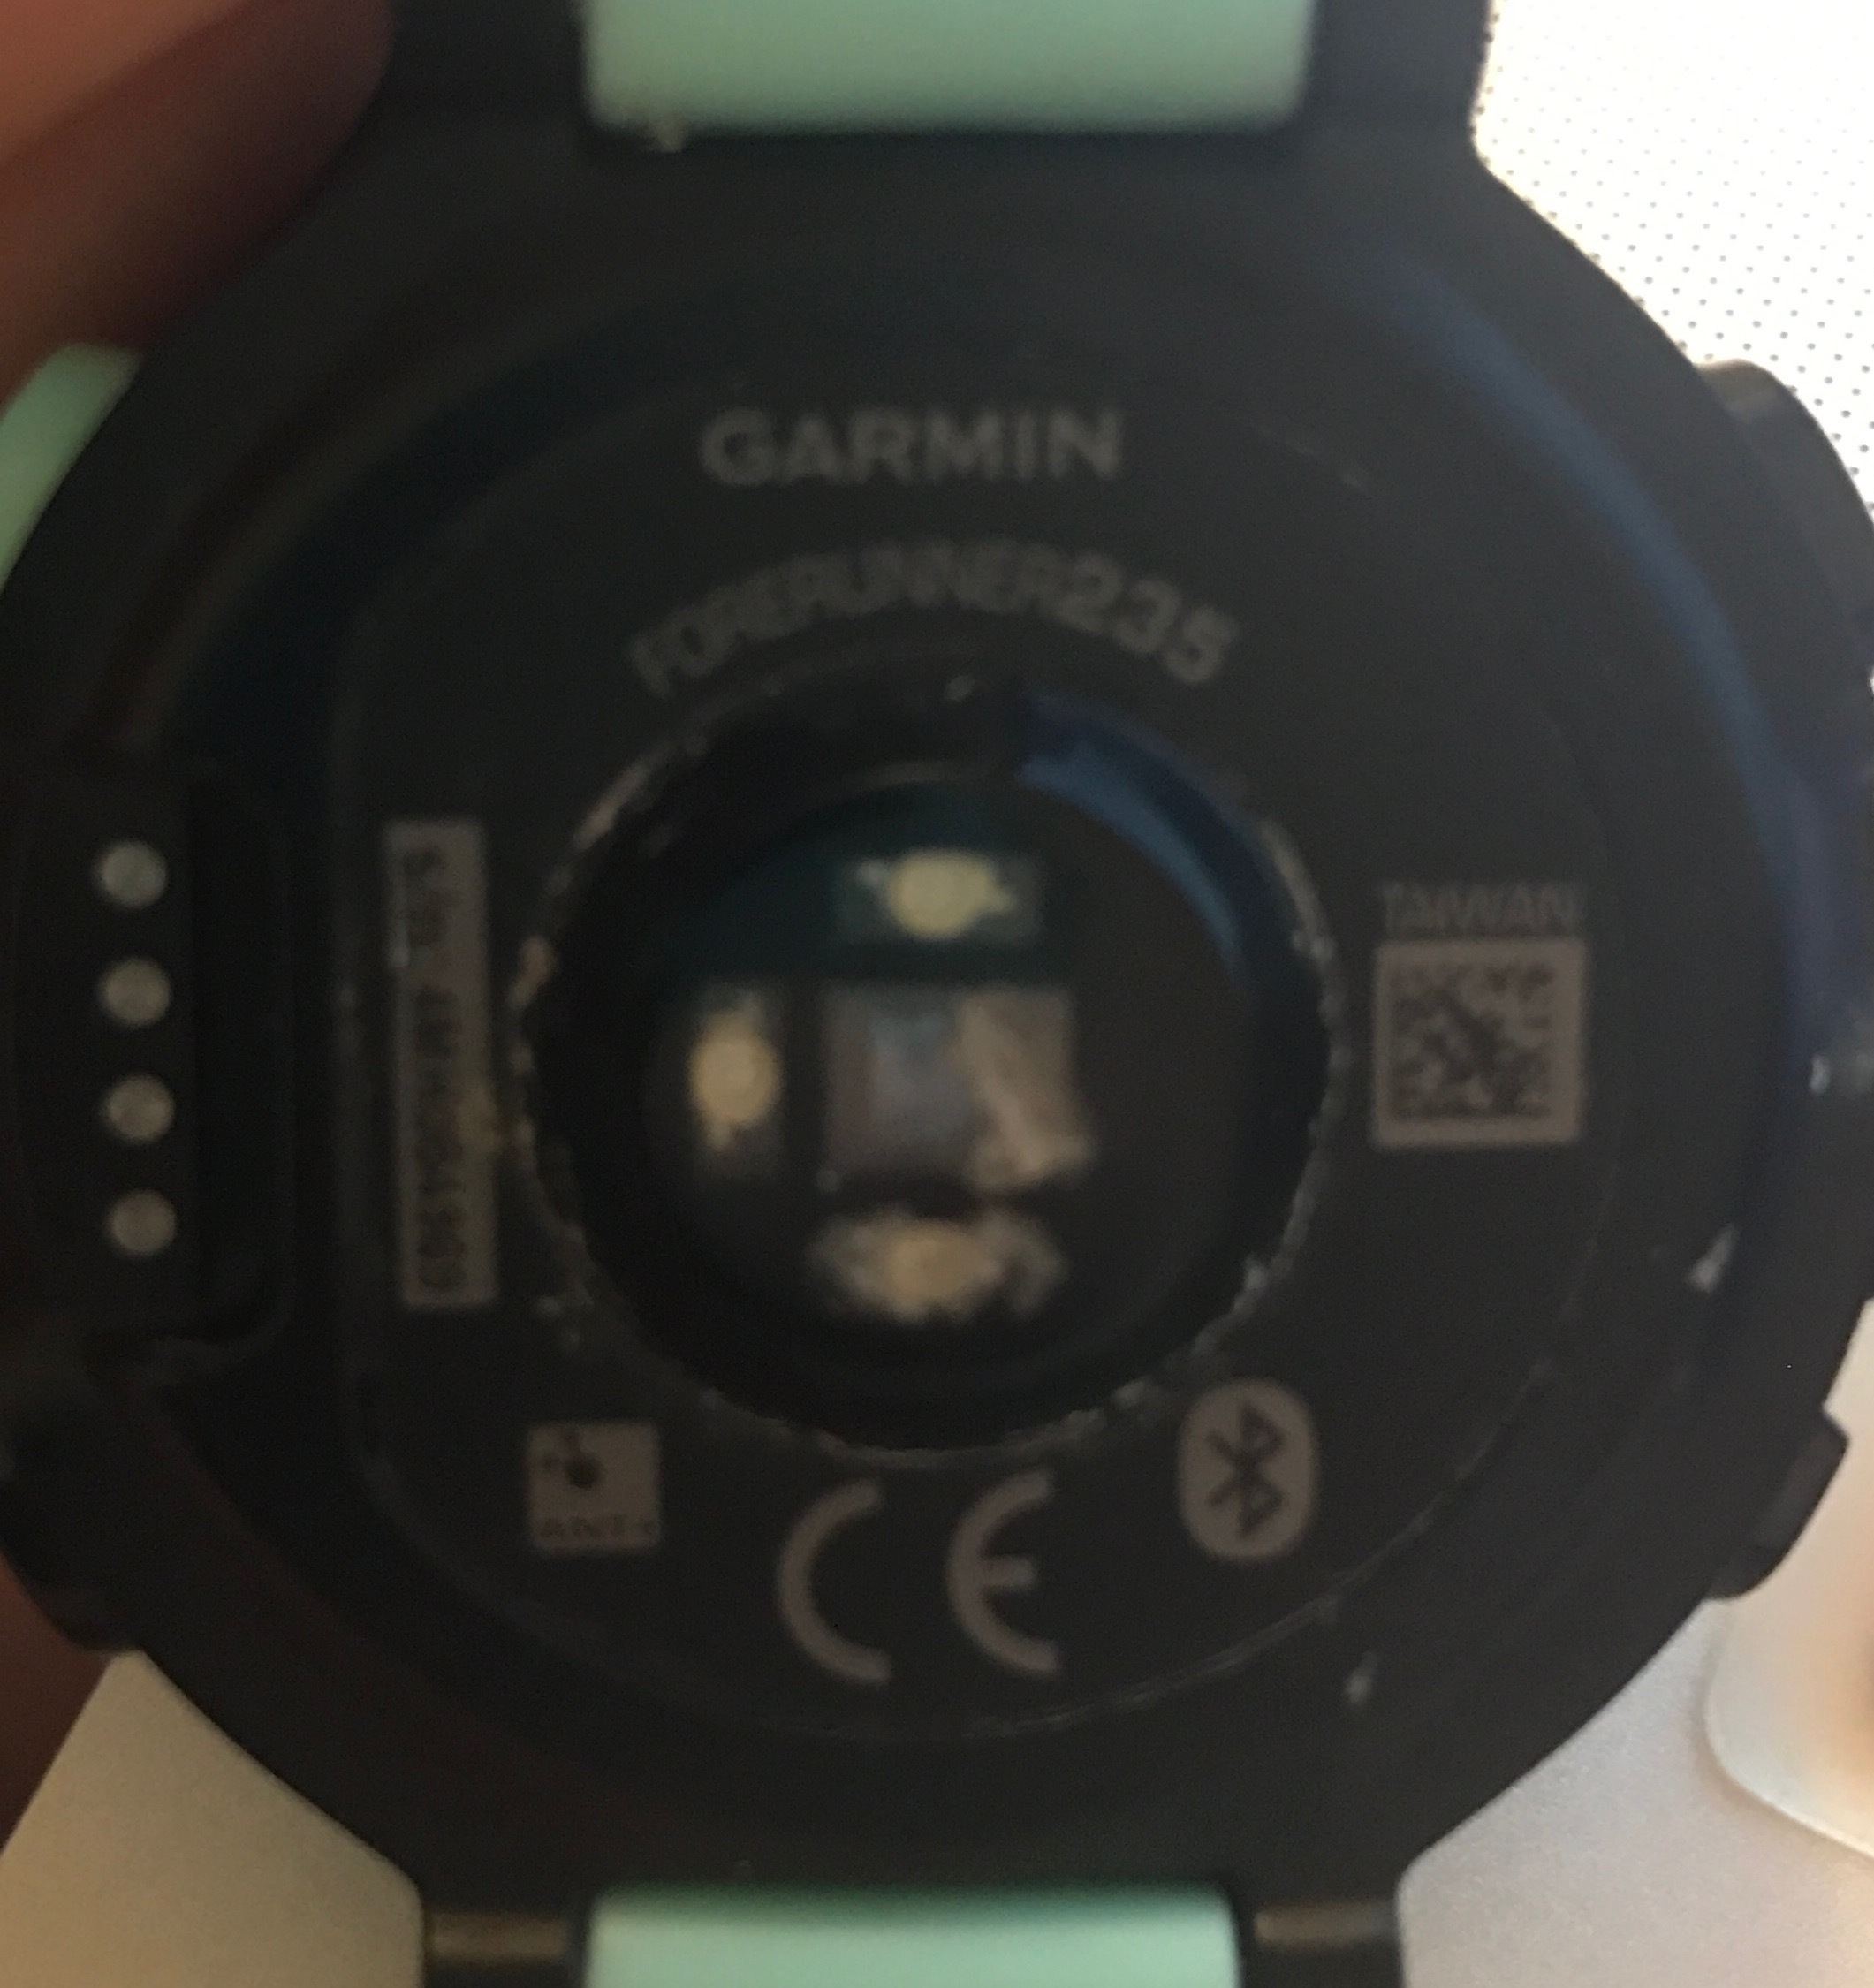 heart rate monitor on garmin 235 not working